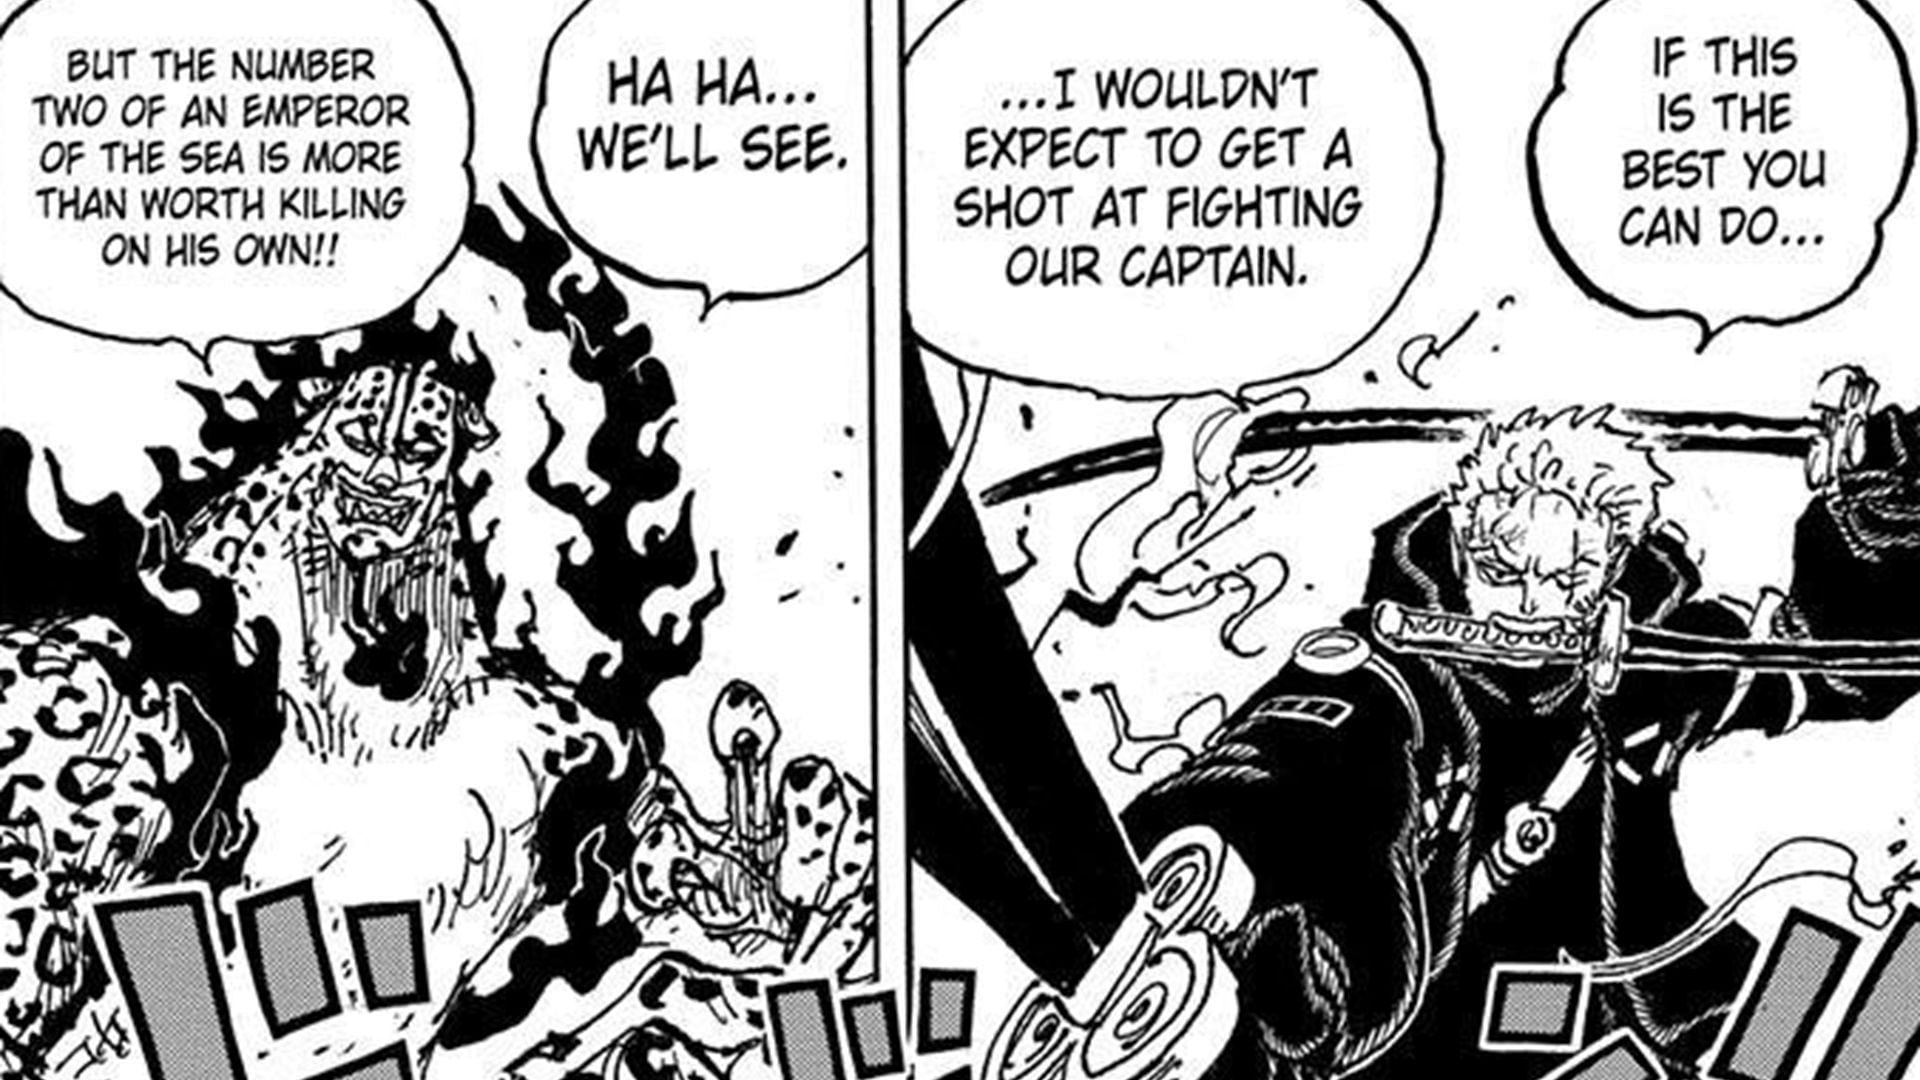 Zoro vs Lucci continues in One Piece chapter 1093 (Image via Shueisha)